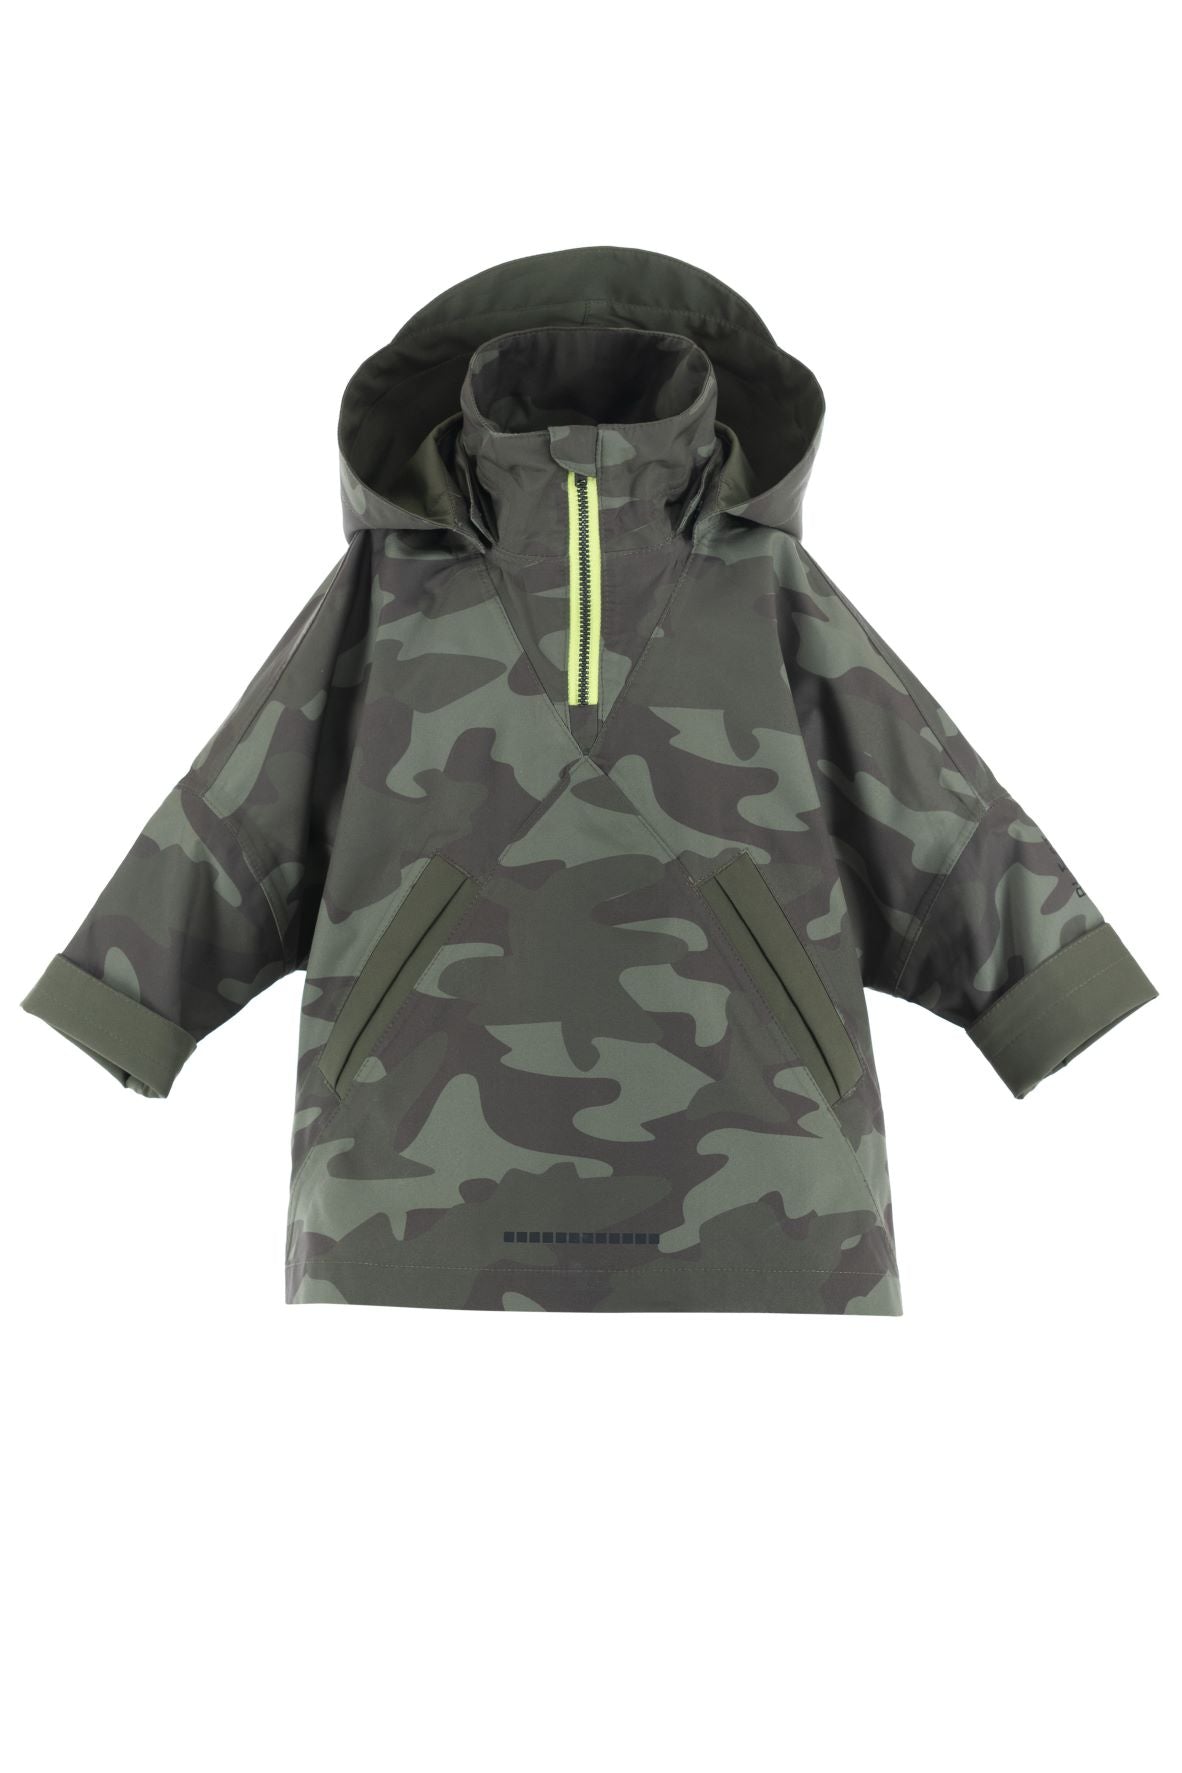 Aalesund Mini poncho Camo from Blæst